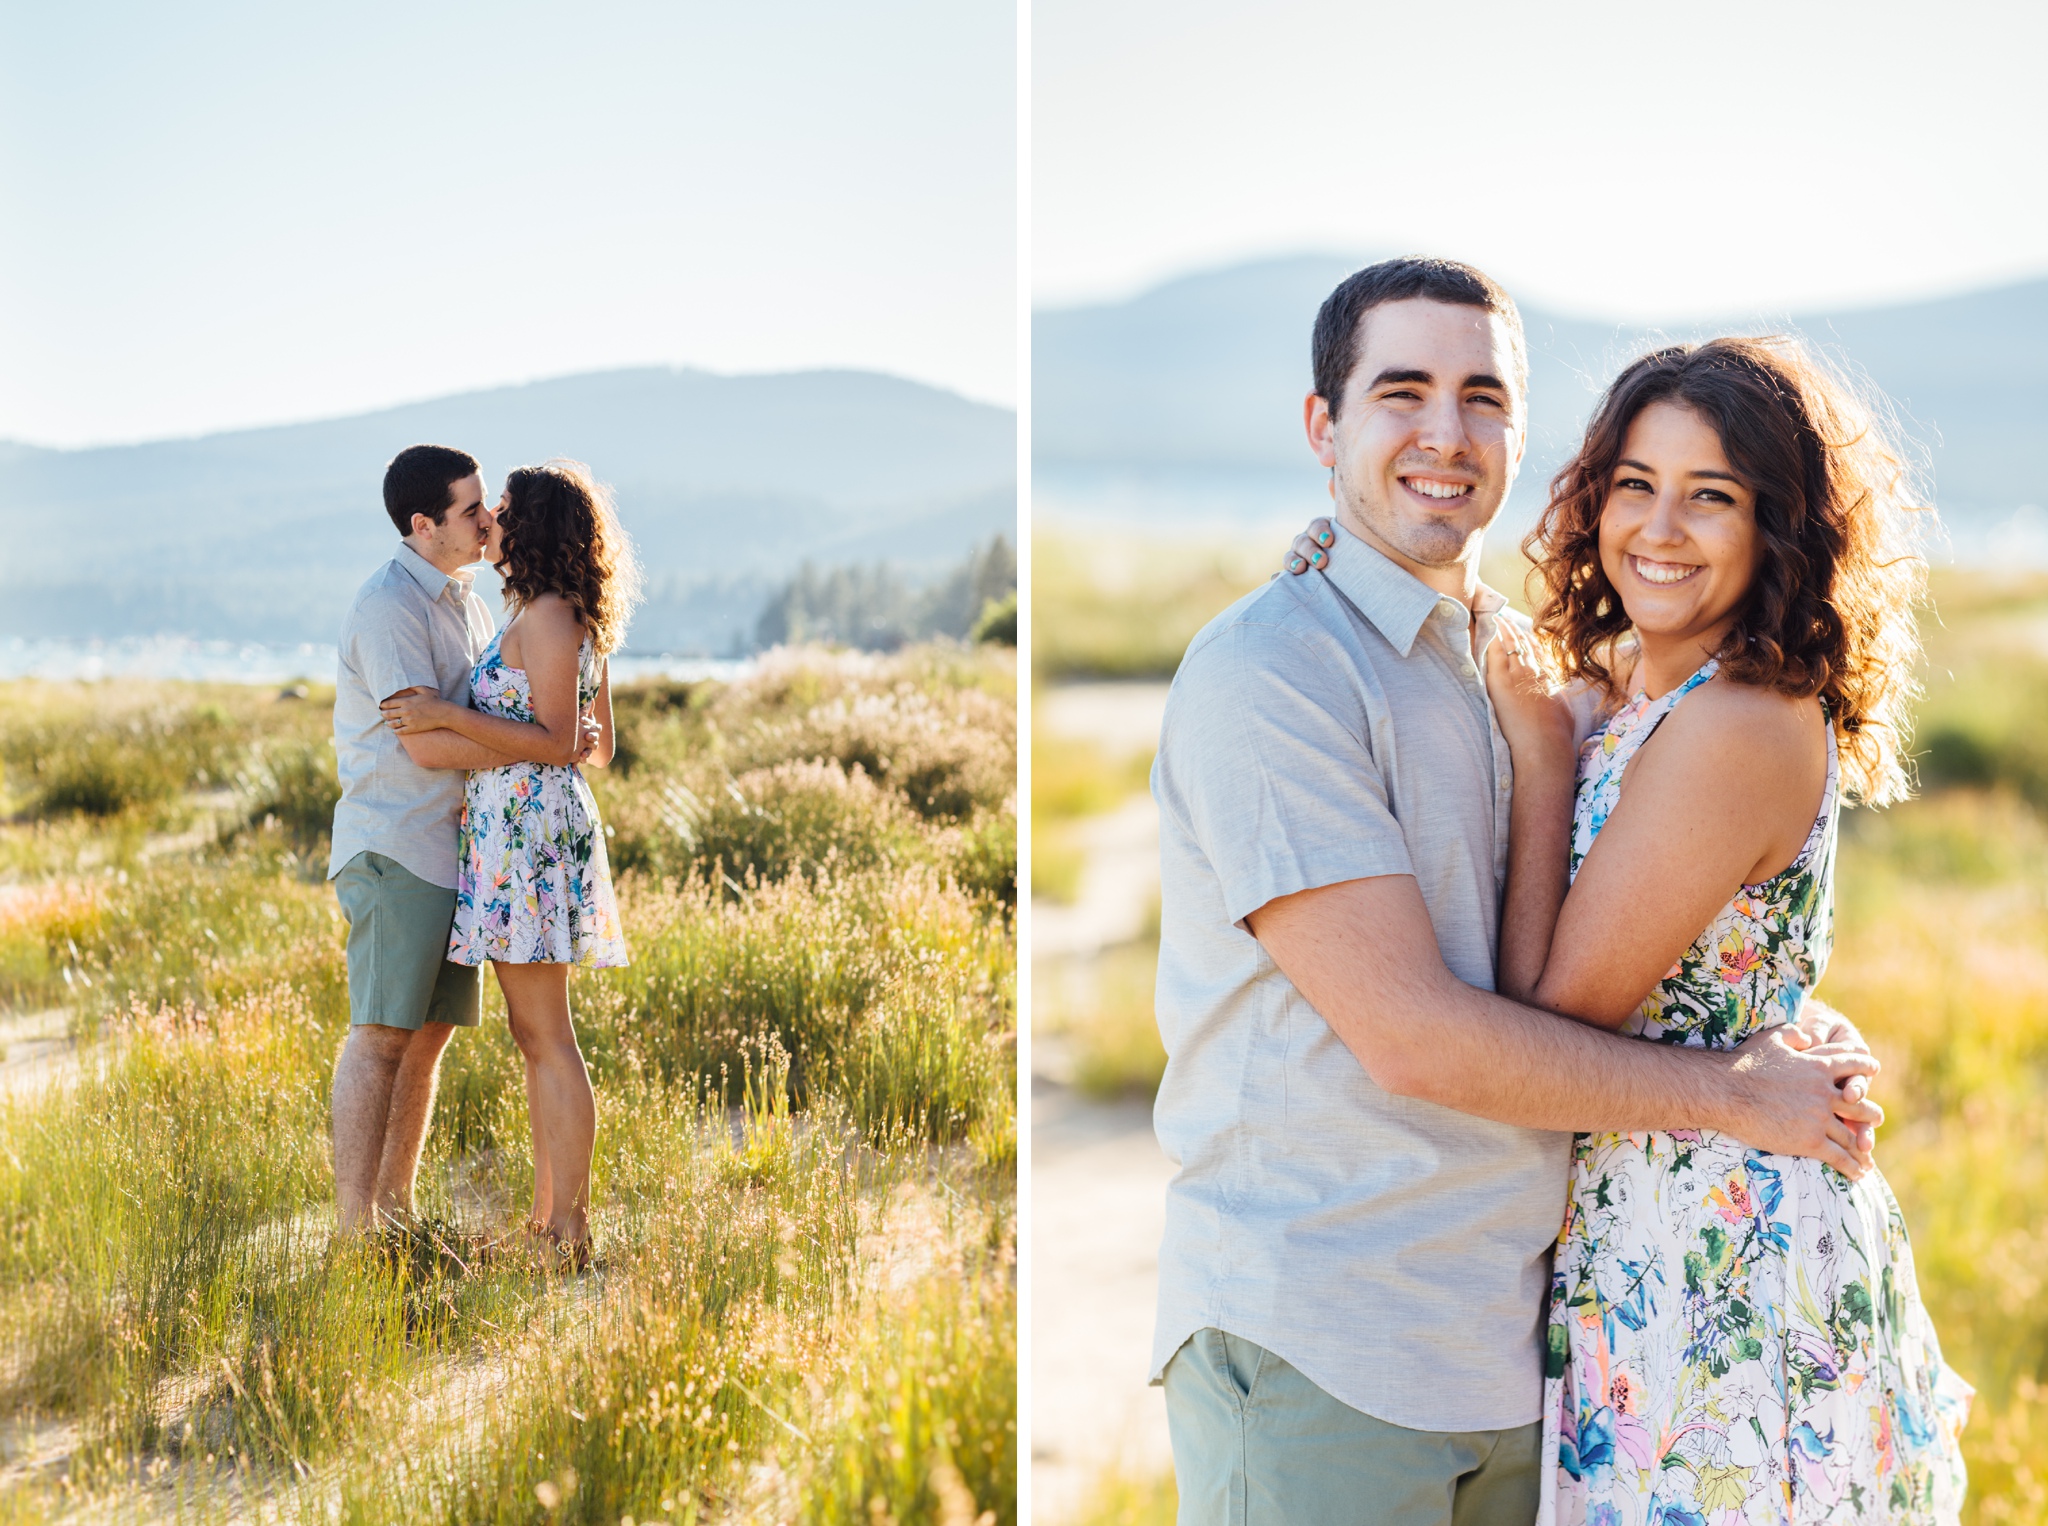 thedelauras_ostaraphotography_laketahoeengagement_laketahoeweddingphotograph_laketahoe_photographer_011